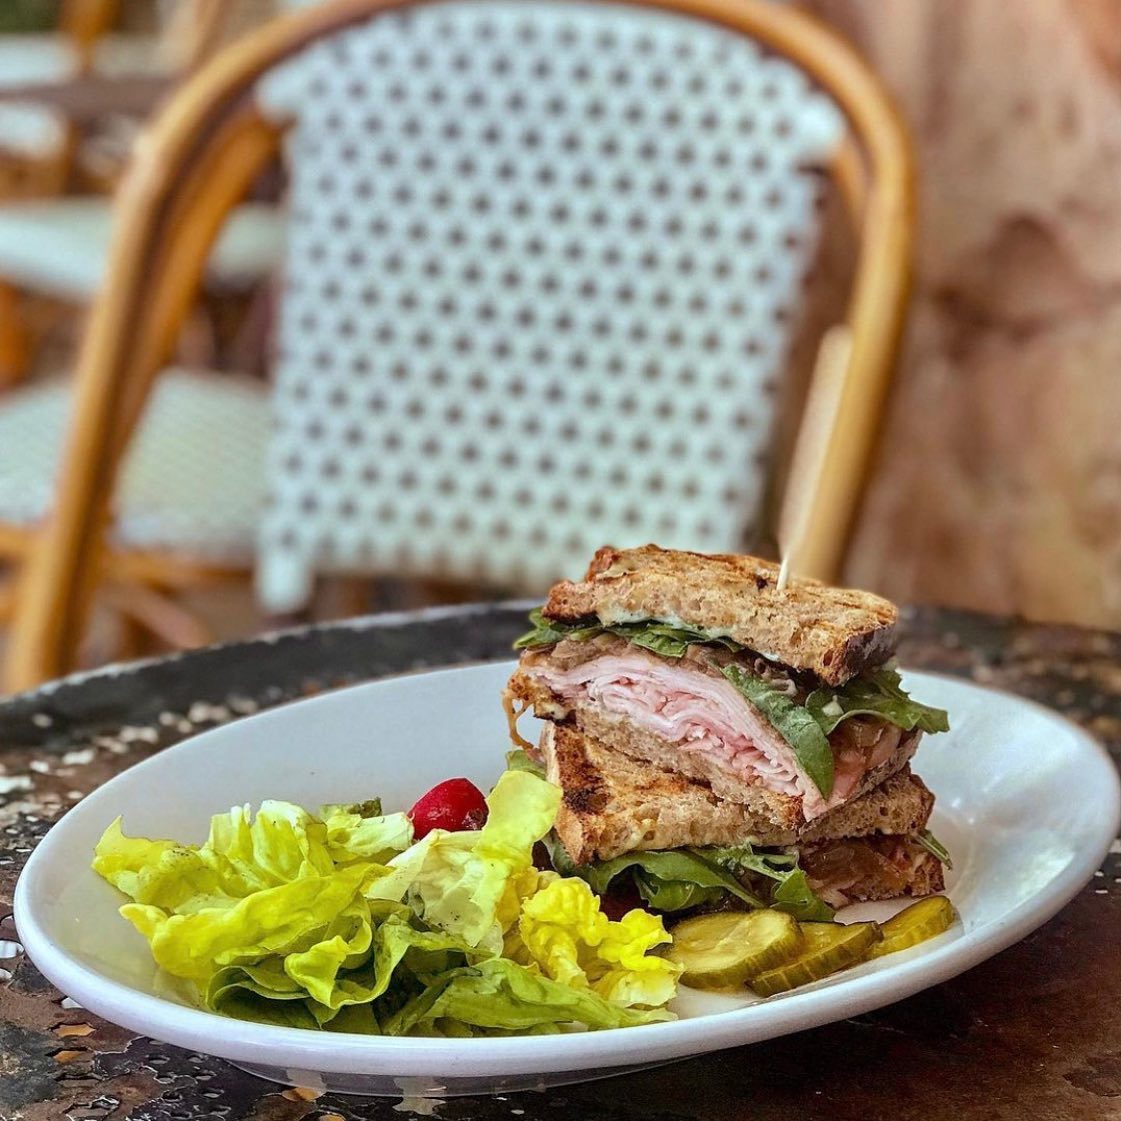 A turkey sandwich and a salad are pictured on a plate. Photo by Instagram user @fonfonbham